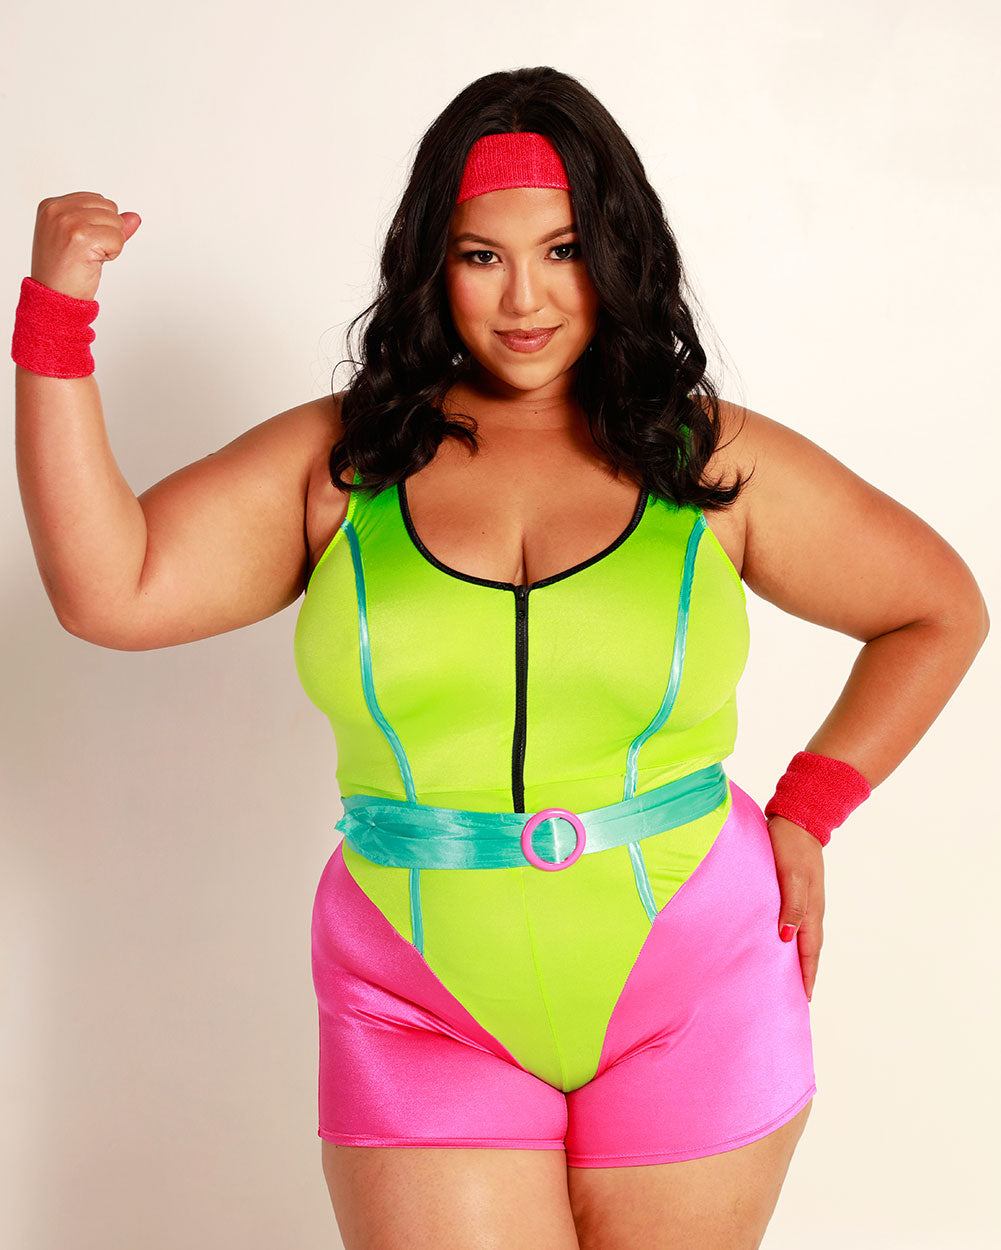 80s Work out Costume With Jumpsuit Neon Headband and Wrist Cuffs